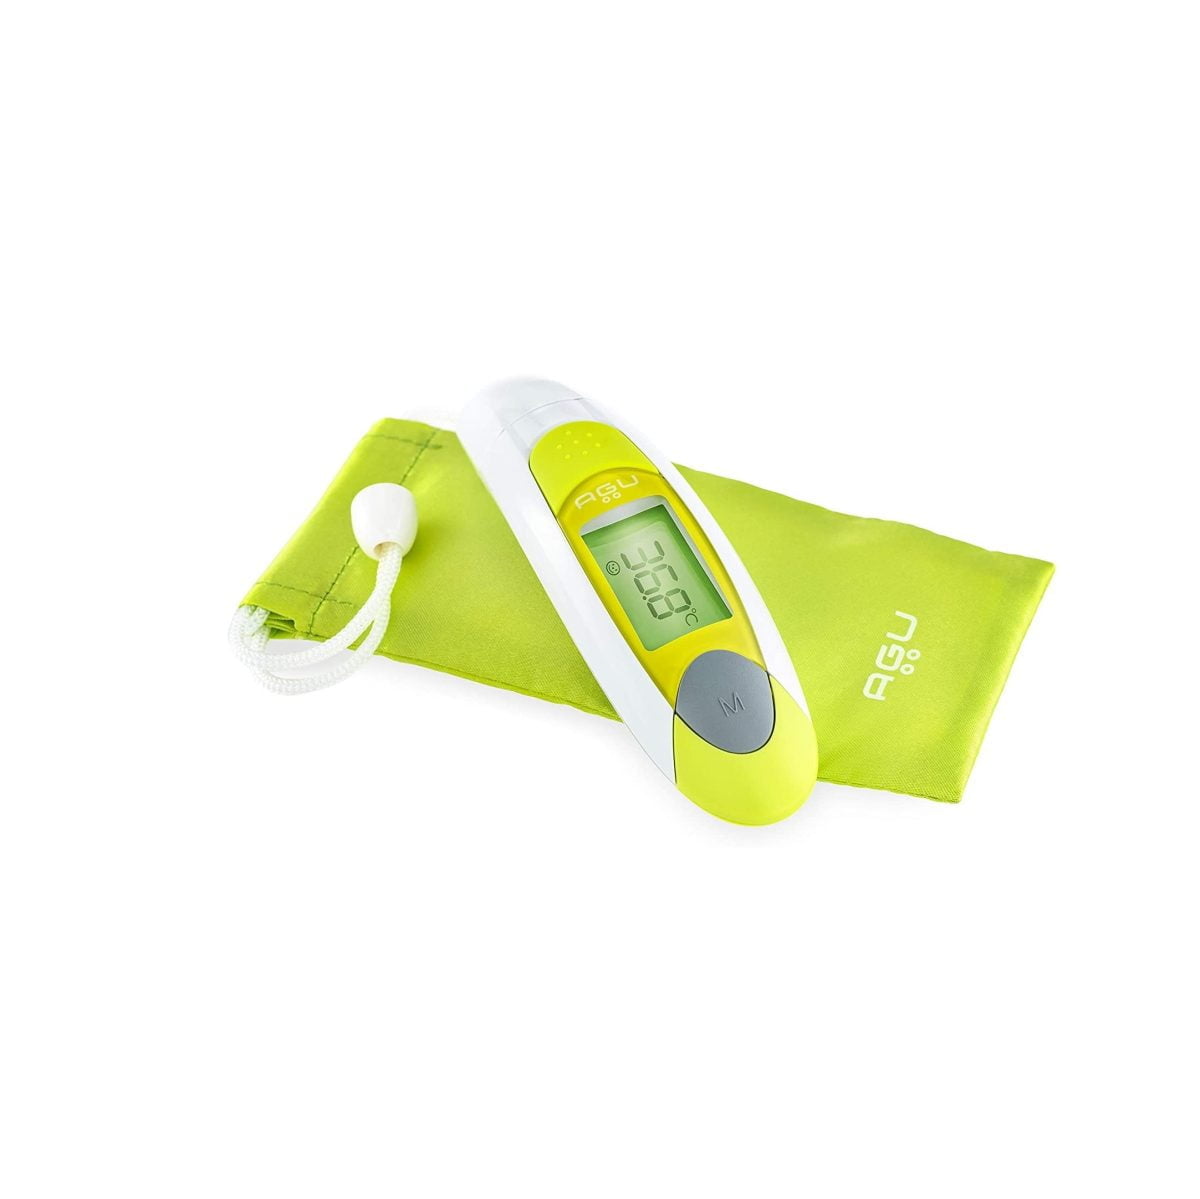 Agu Infrared Thermometer